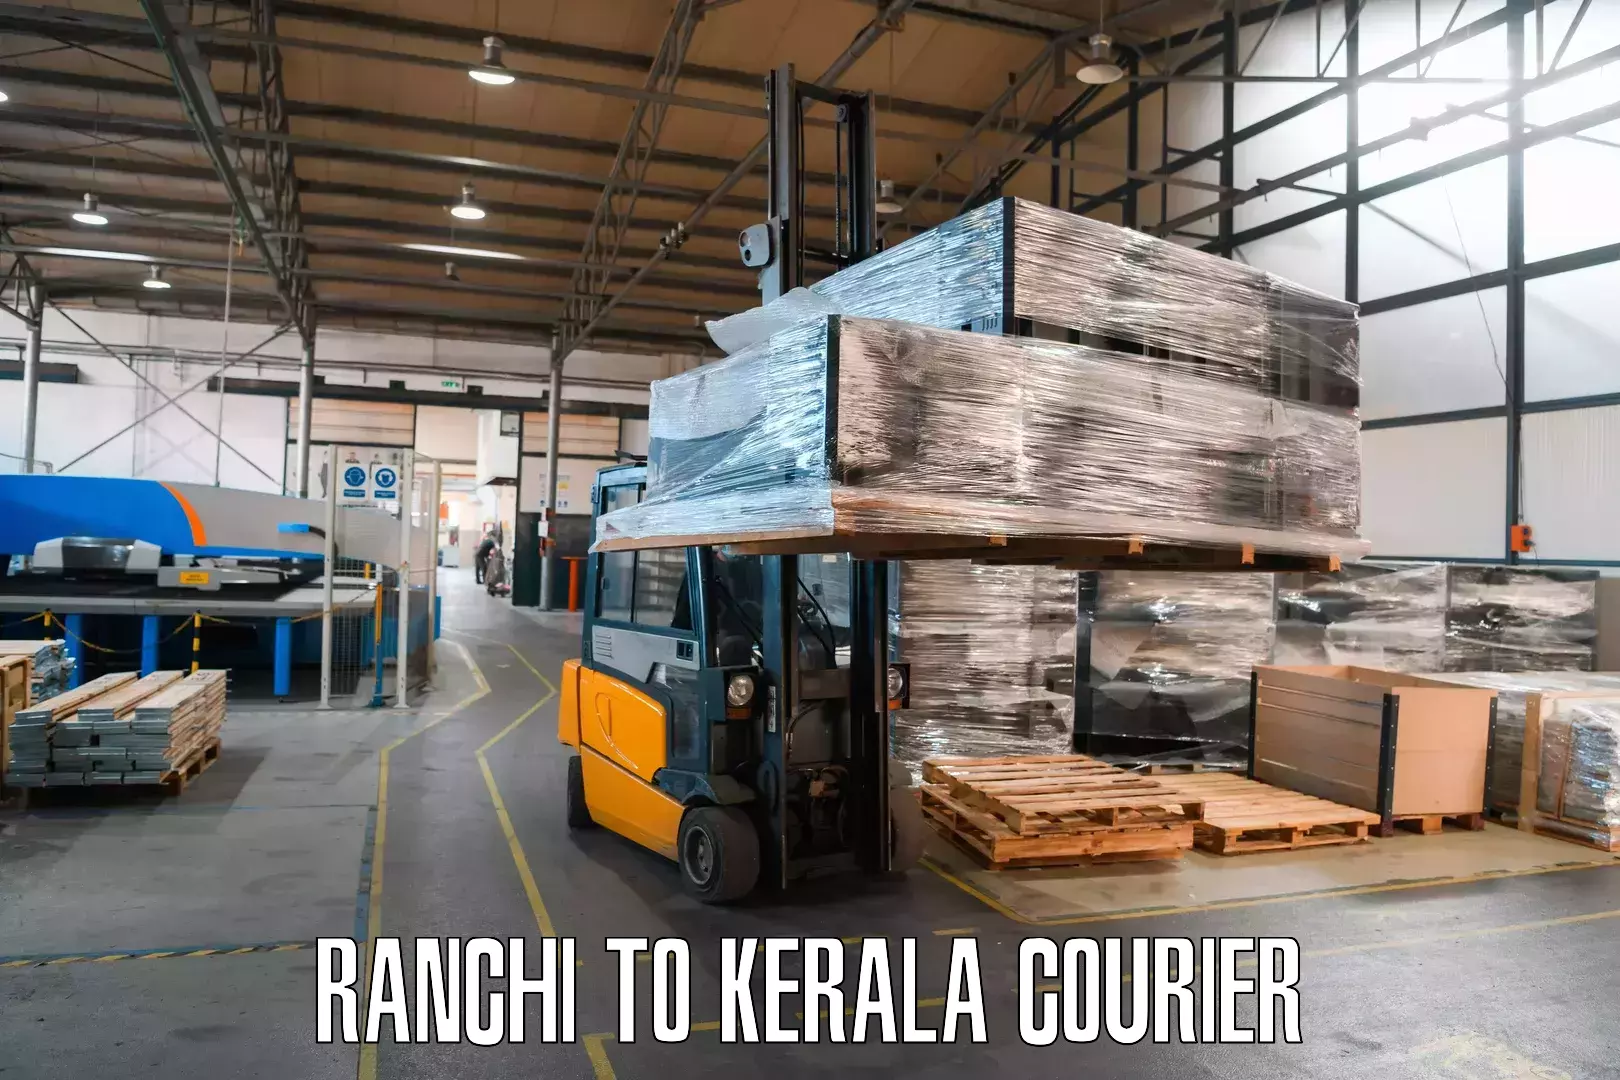 Reliable logistics providers Ranchi to Cochin University of Science and Technology